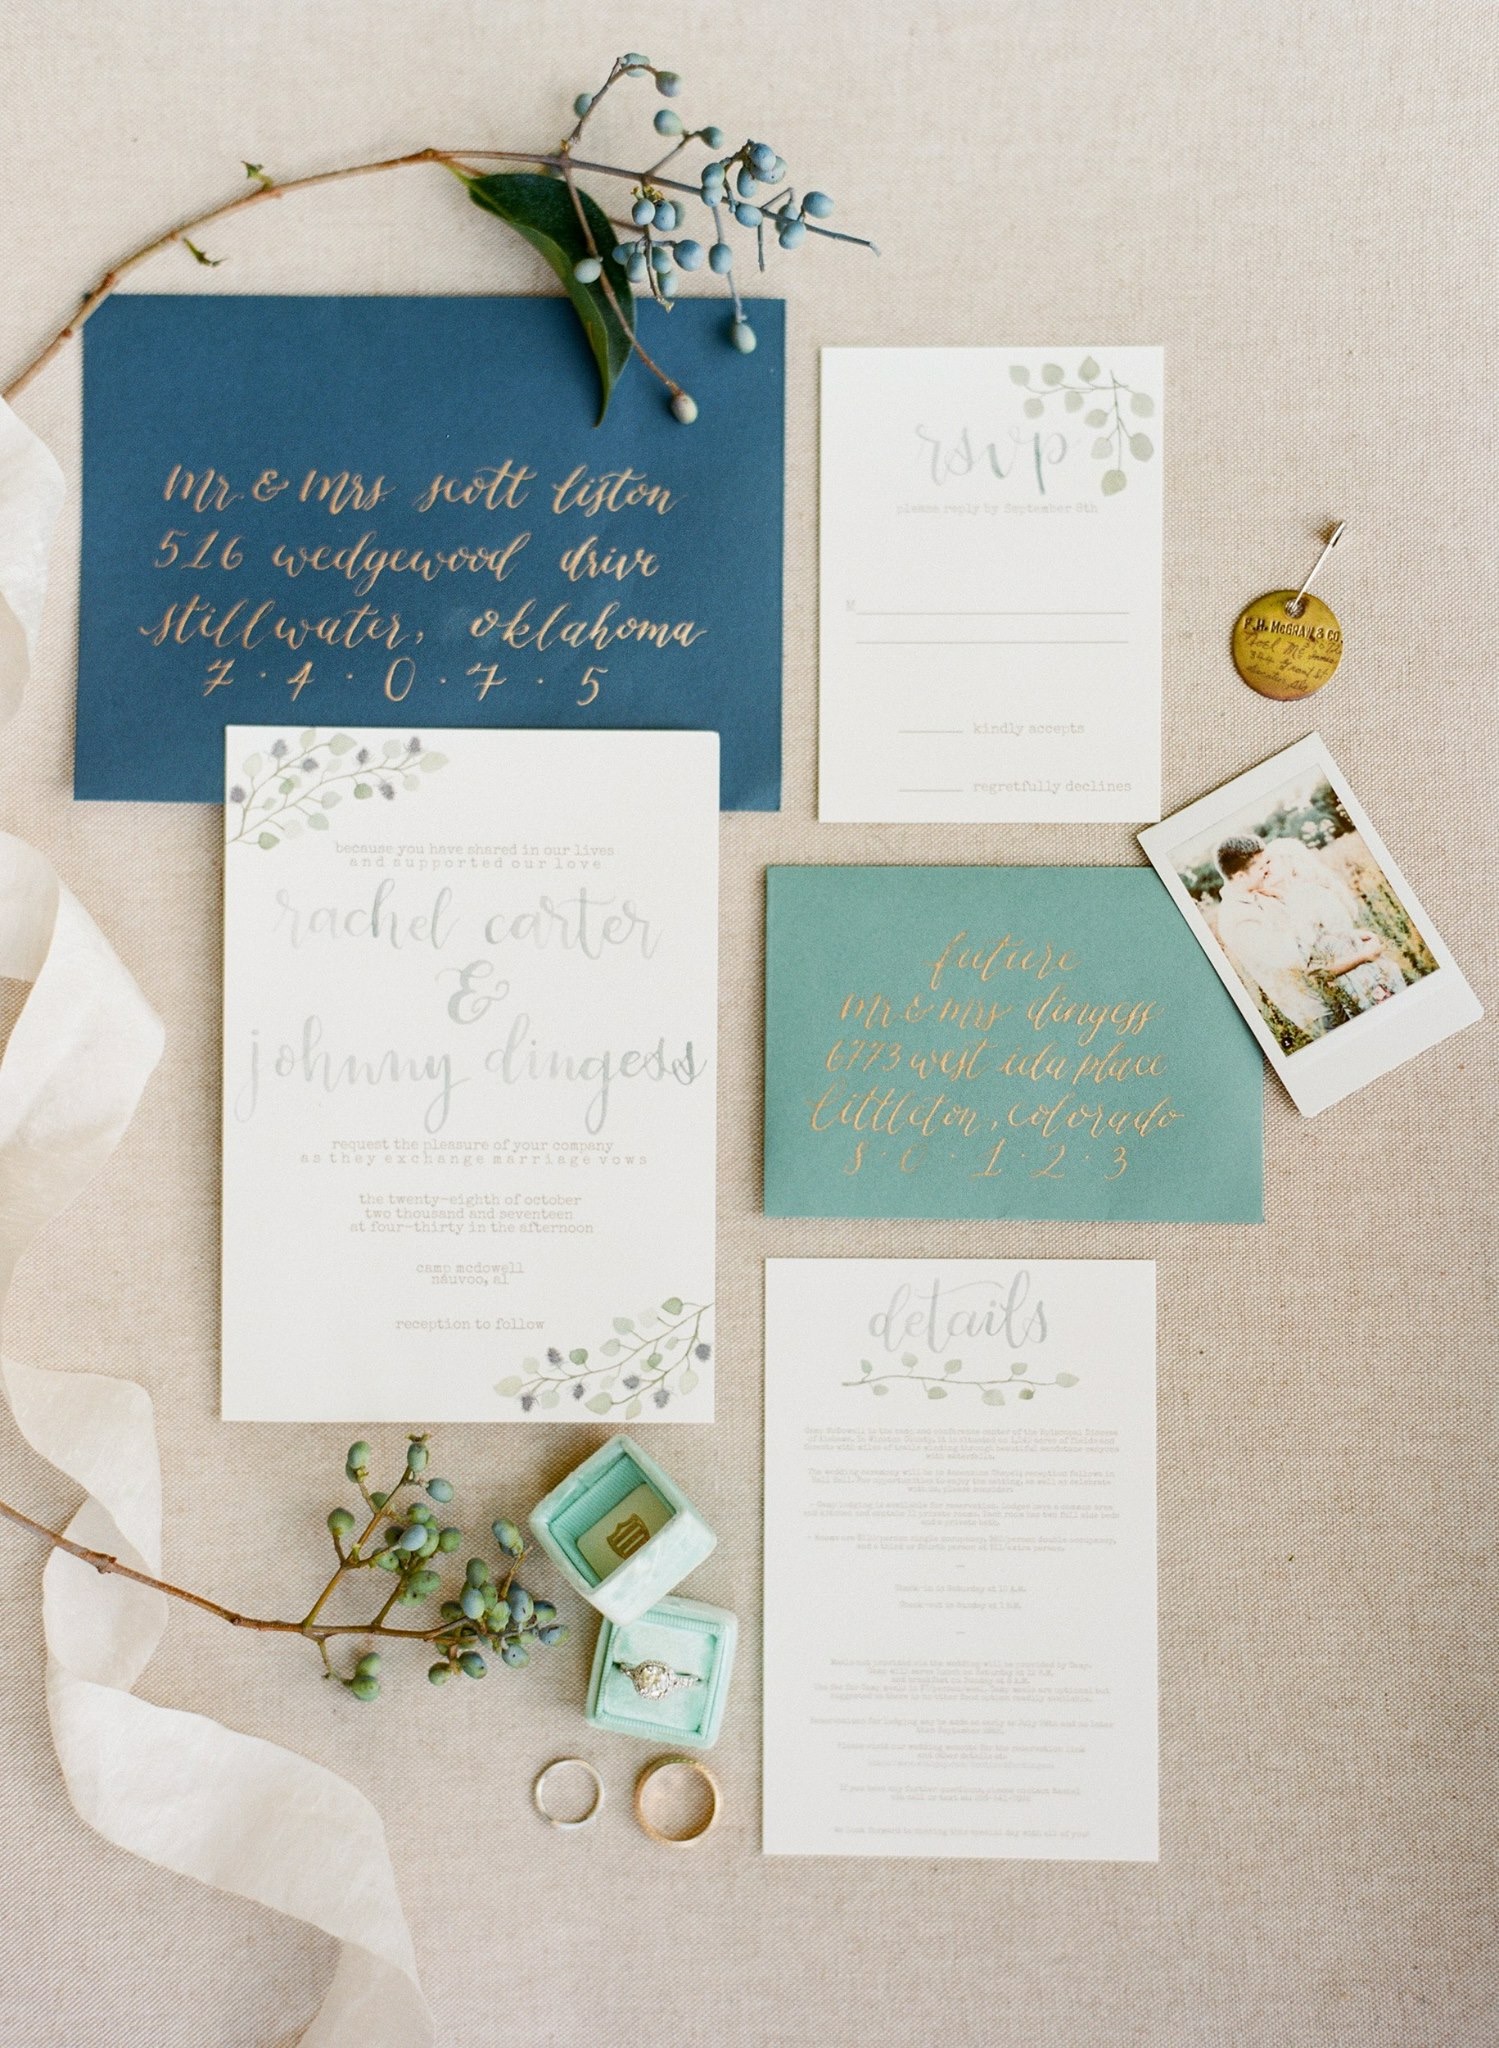 Camp McDowell Wedding Invitations and Calligraphy